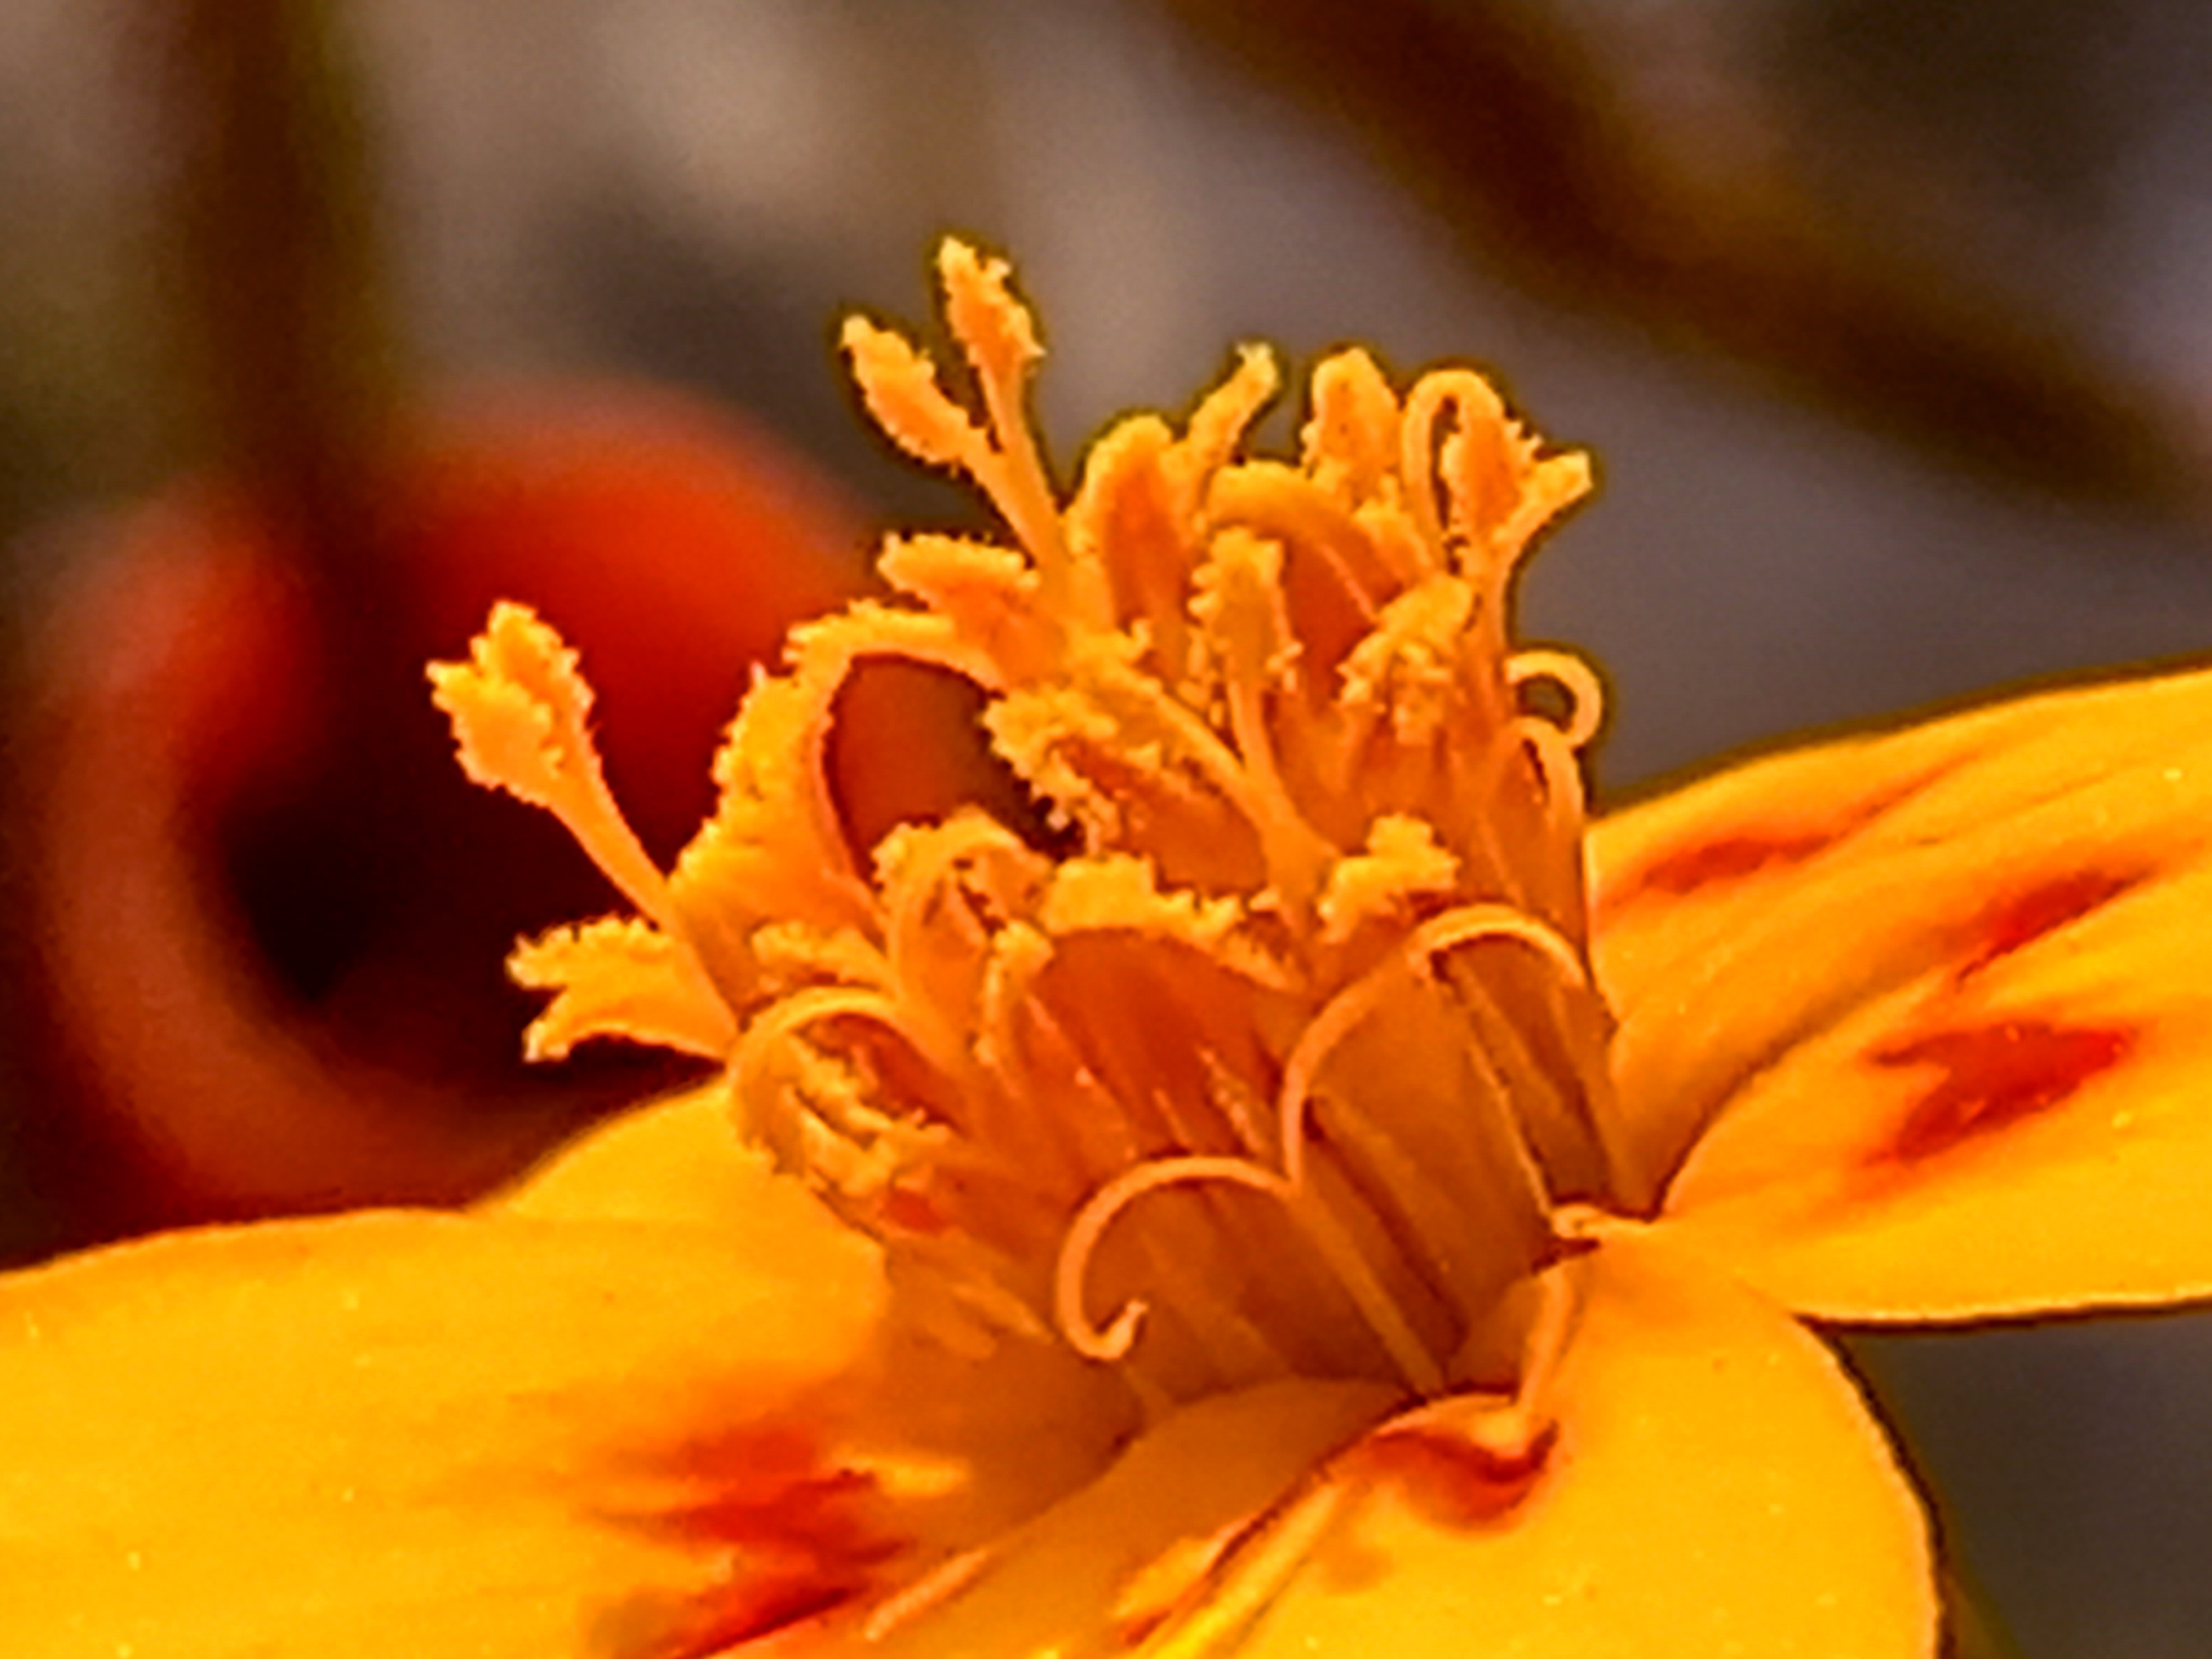 French Marigold Flower Images